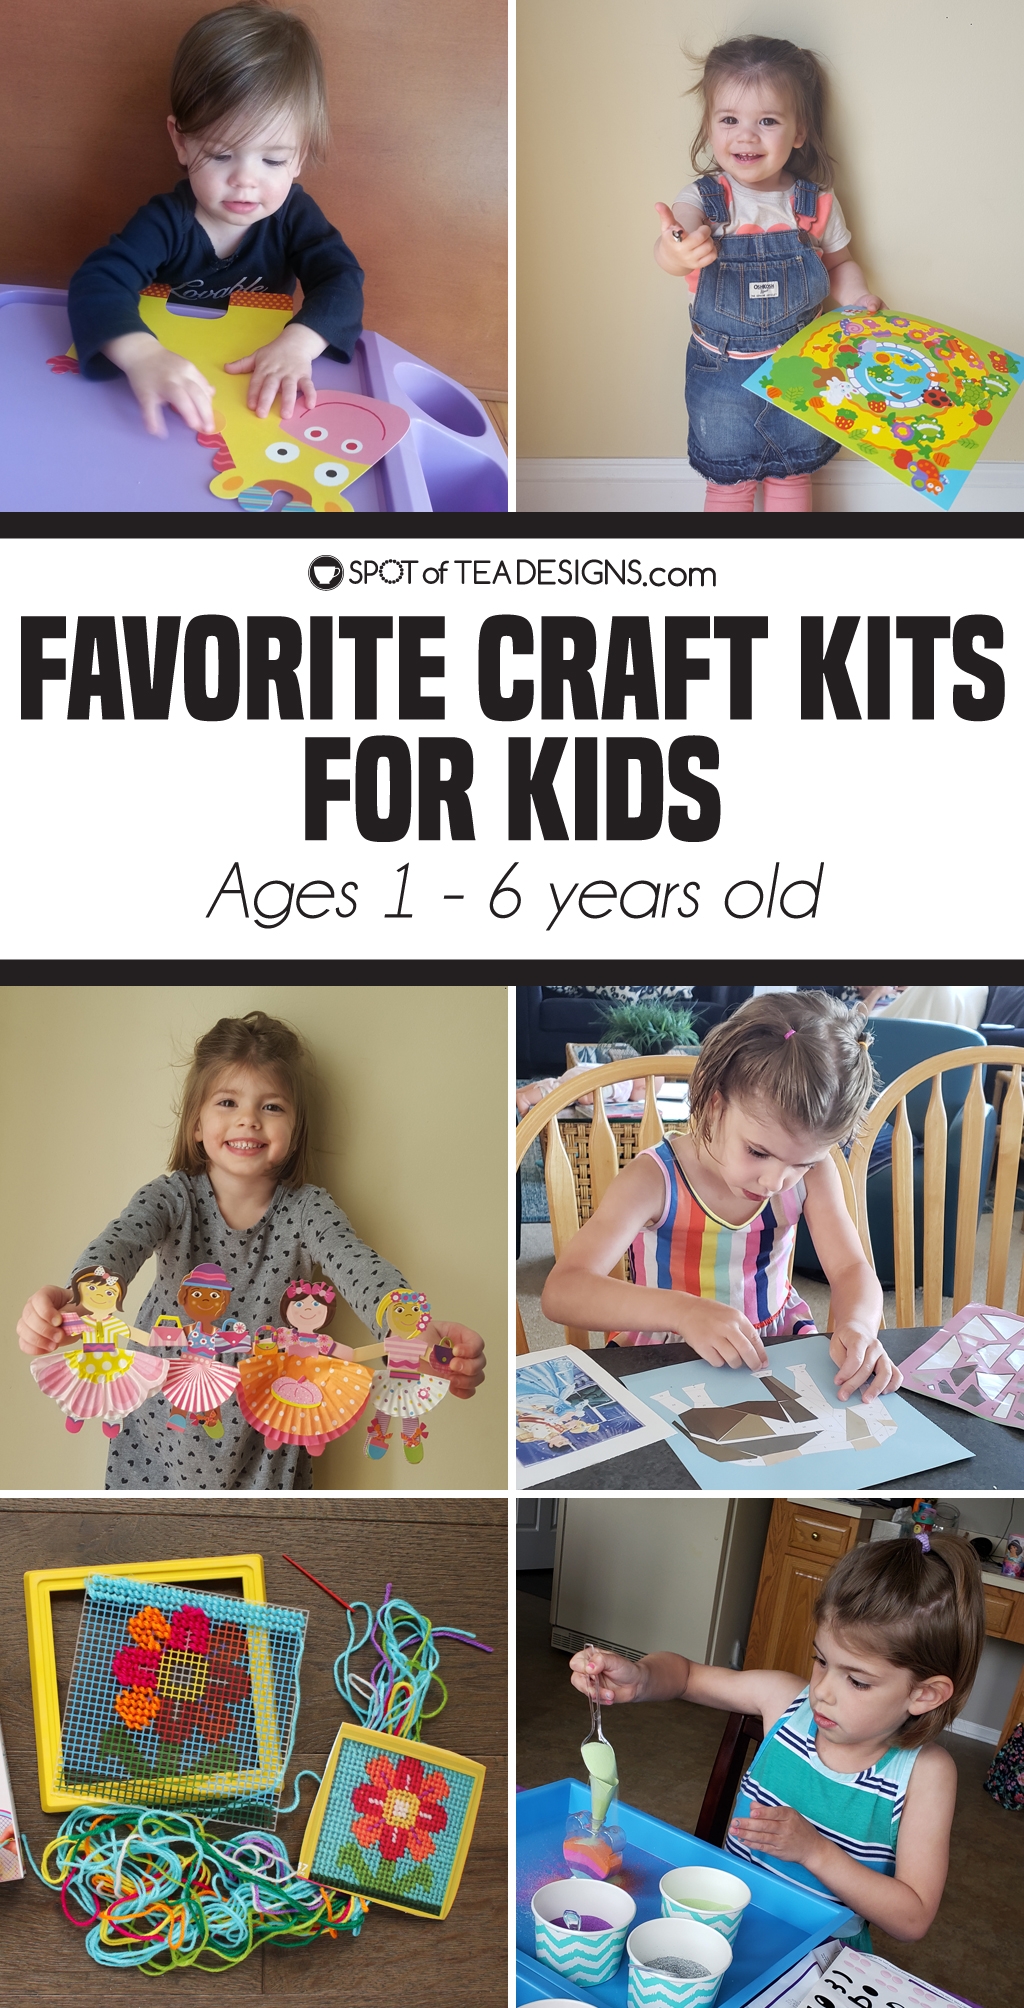 20+ Favorite Craft Kits for Kids Ages 1 - 6 years - Spot of Tea Designs